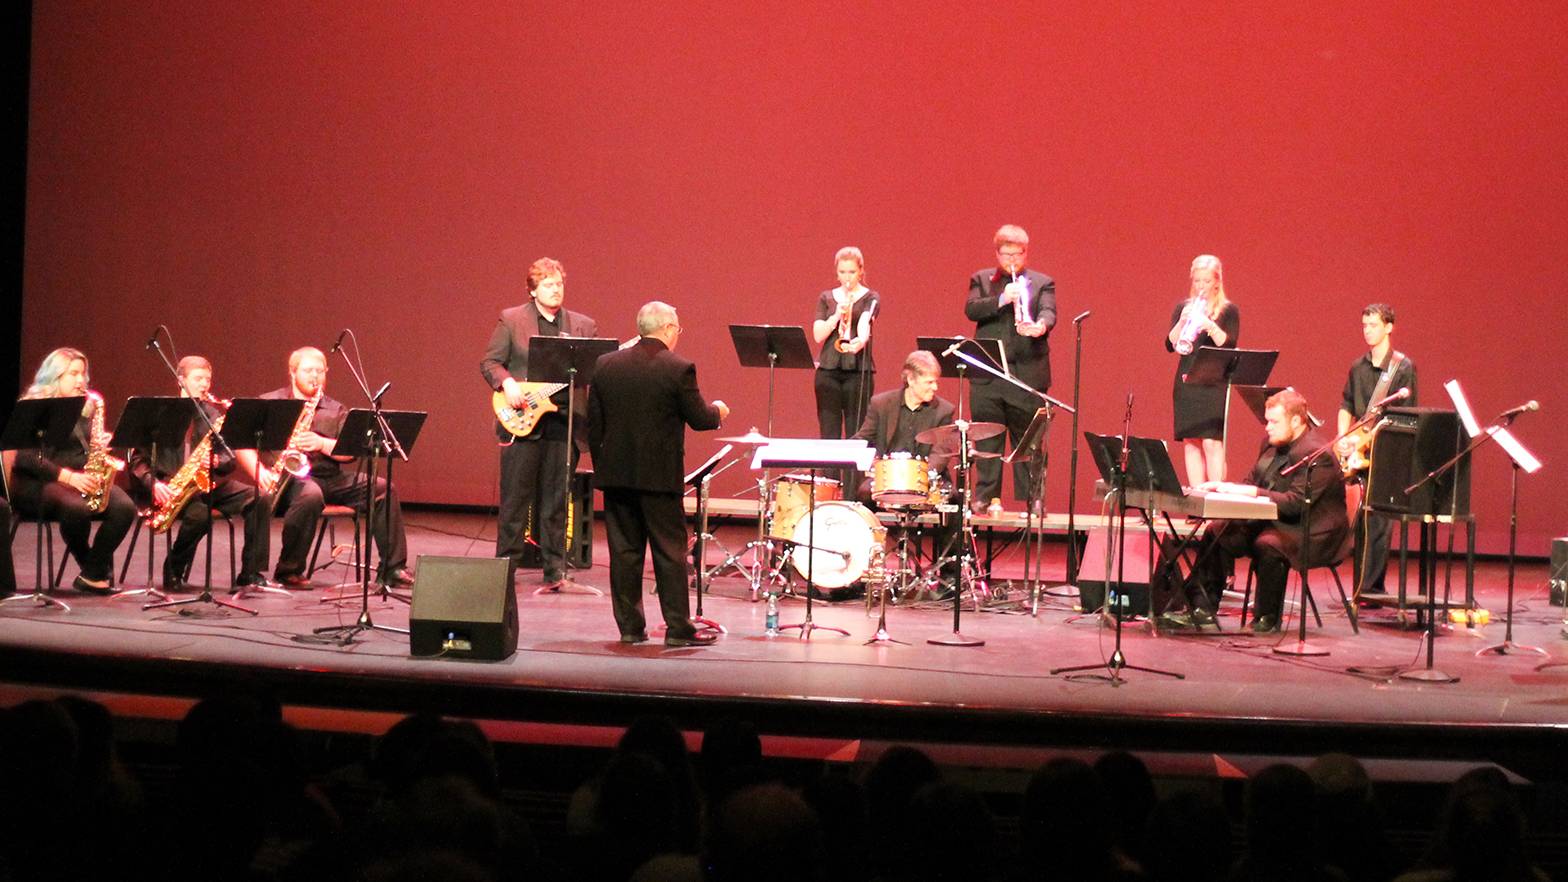 Ouachita's Division of Music to host Jazz Band concert Feb. 24